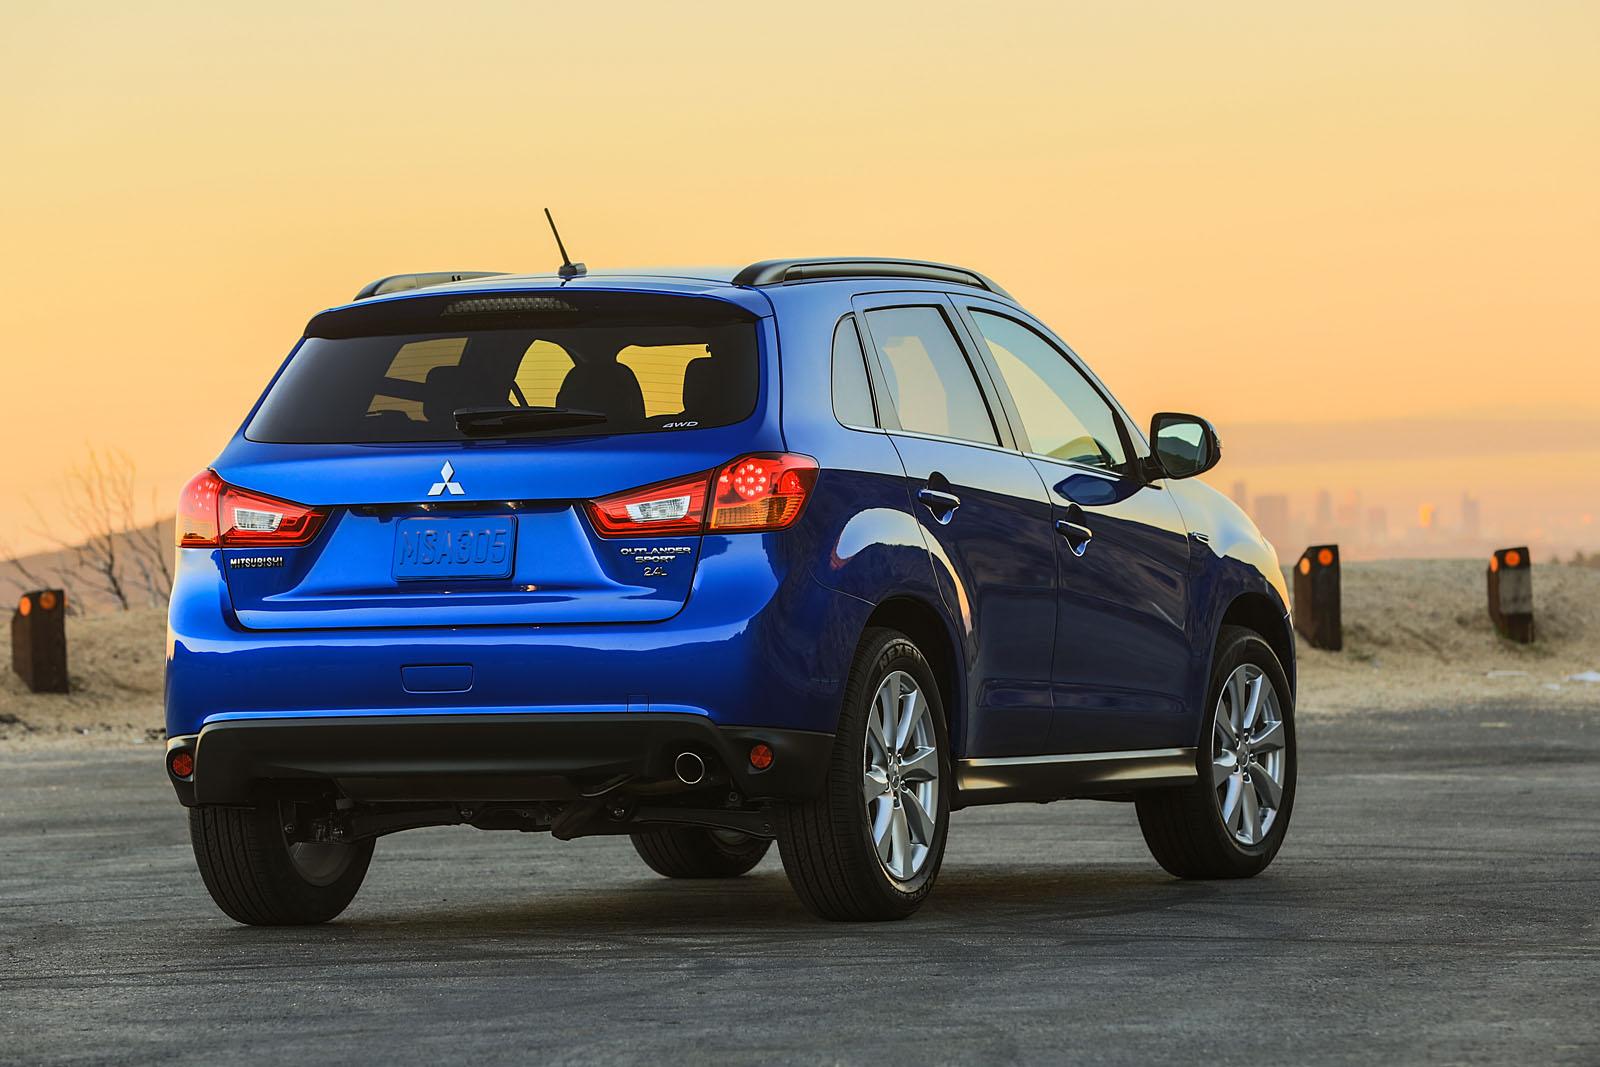 2015 Mitsubishi Outlander Sport Now Available With 2.4L MIVEC Engine